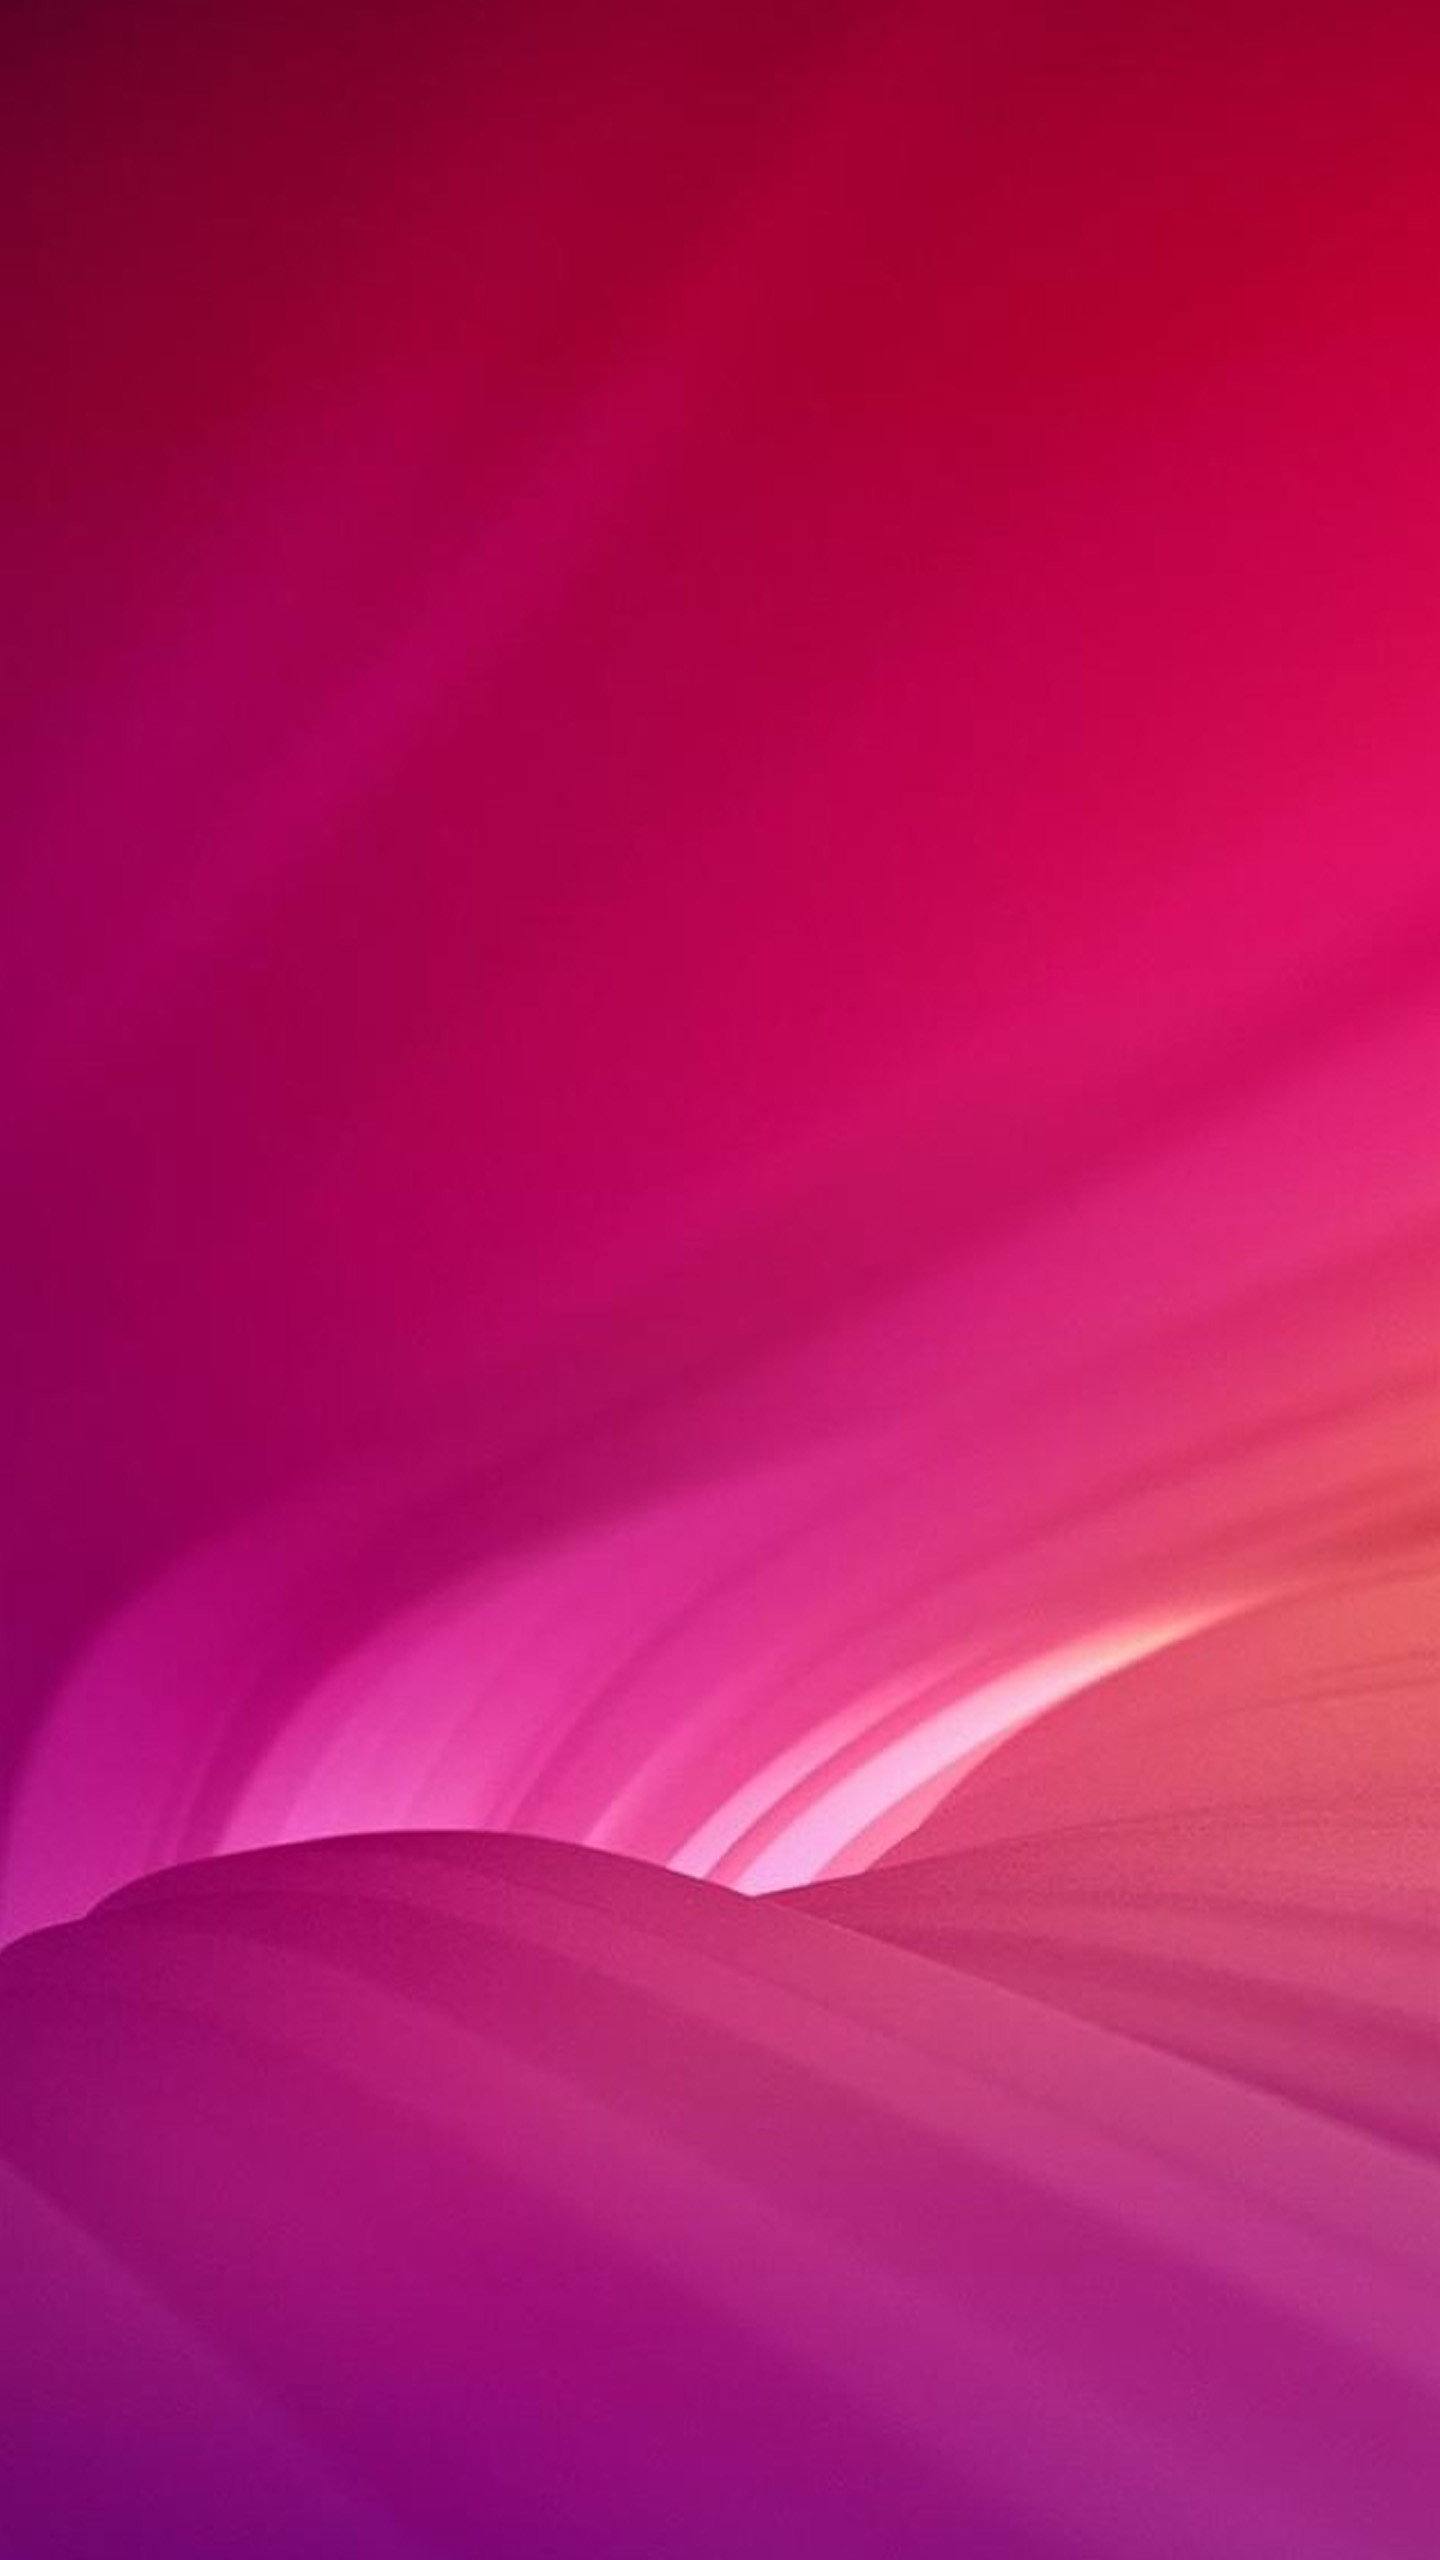 Abstract Samsung Galaxy Note 4 Wallpapers 291